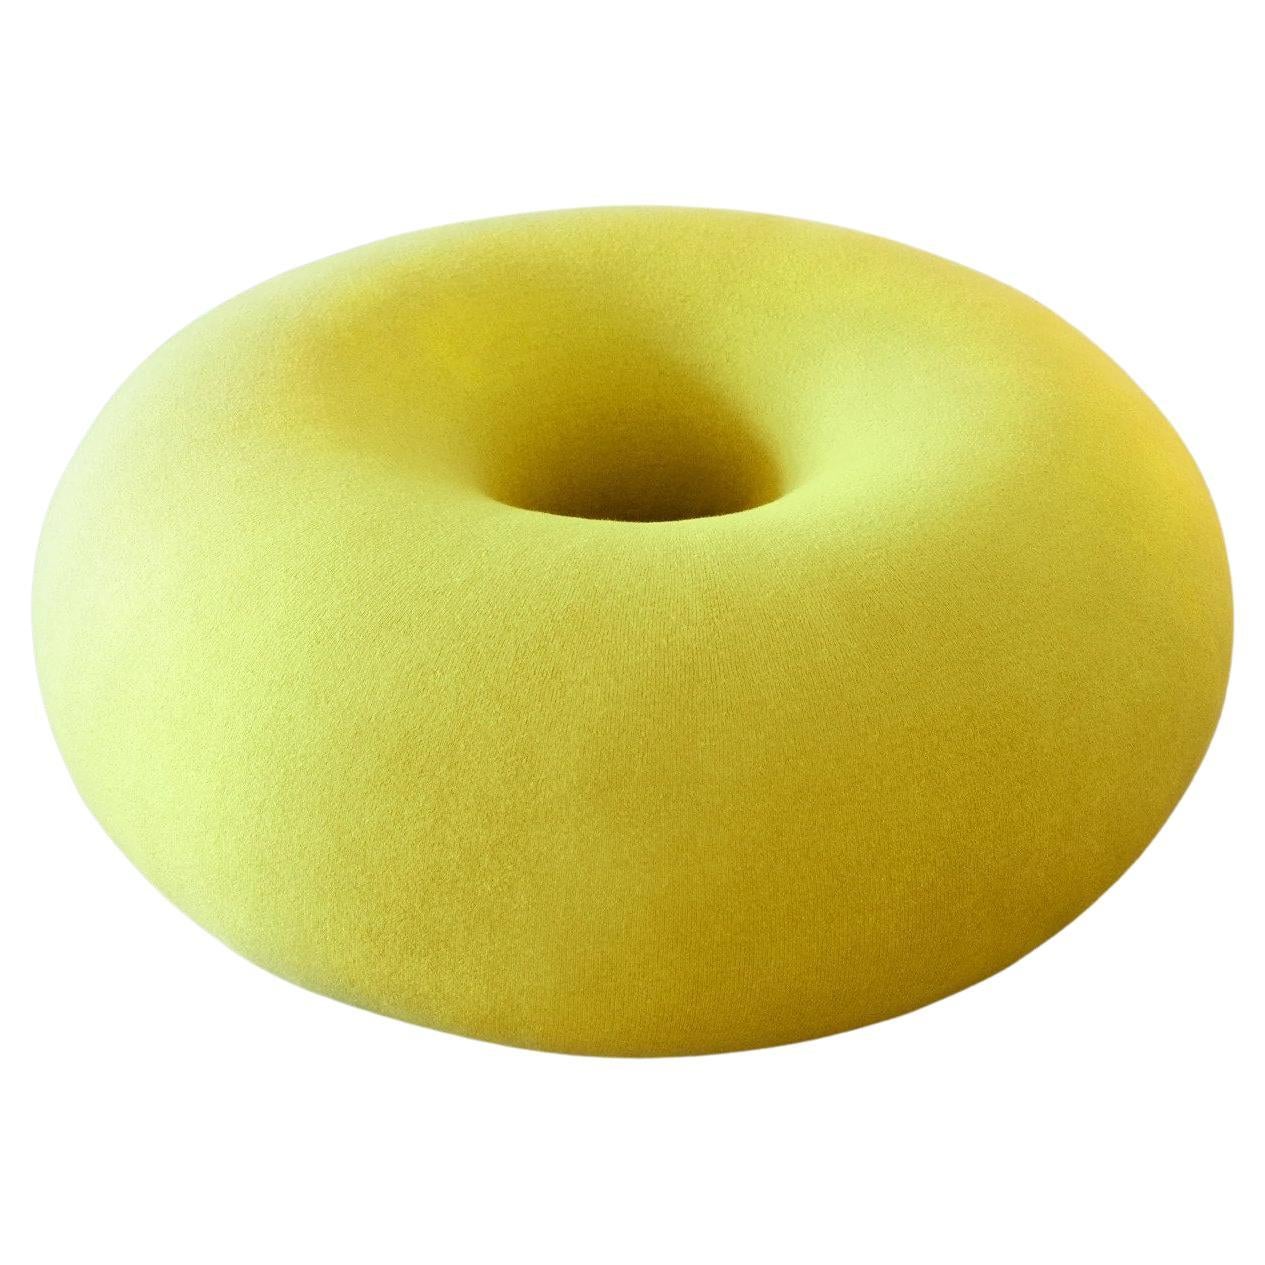 Boa Pouf in Sulfur Yellow by Sabine Marcelis For Sale